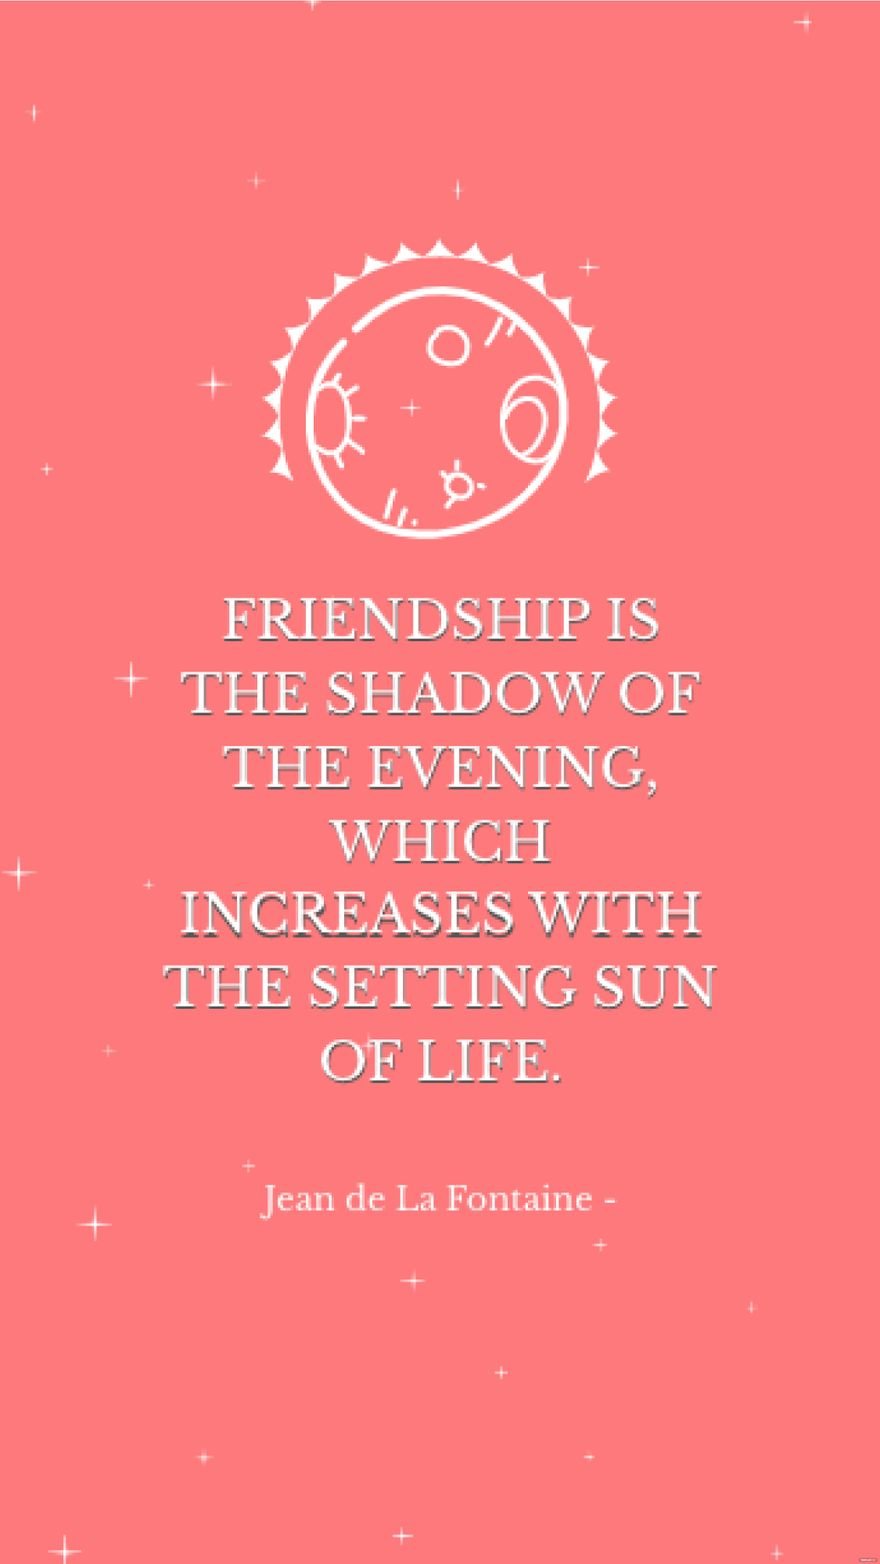 Jean de La Fontaine - Friendship is the shadow of the evening, which increases with the setting sun of life.